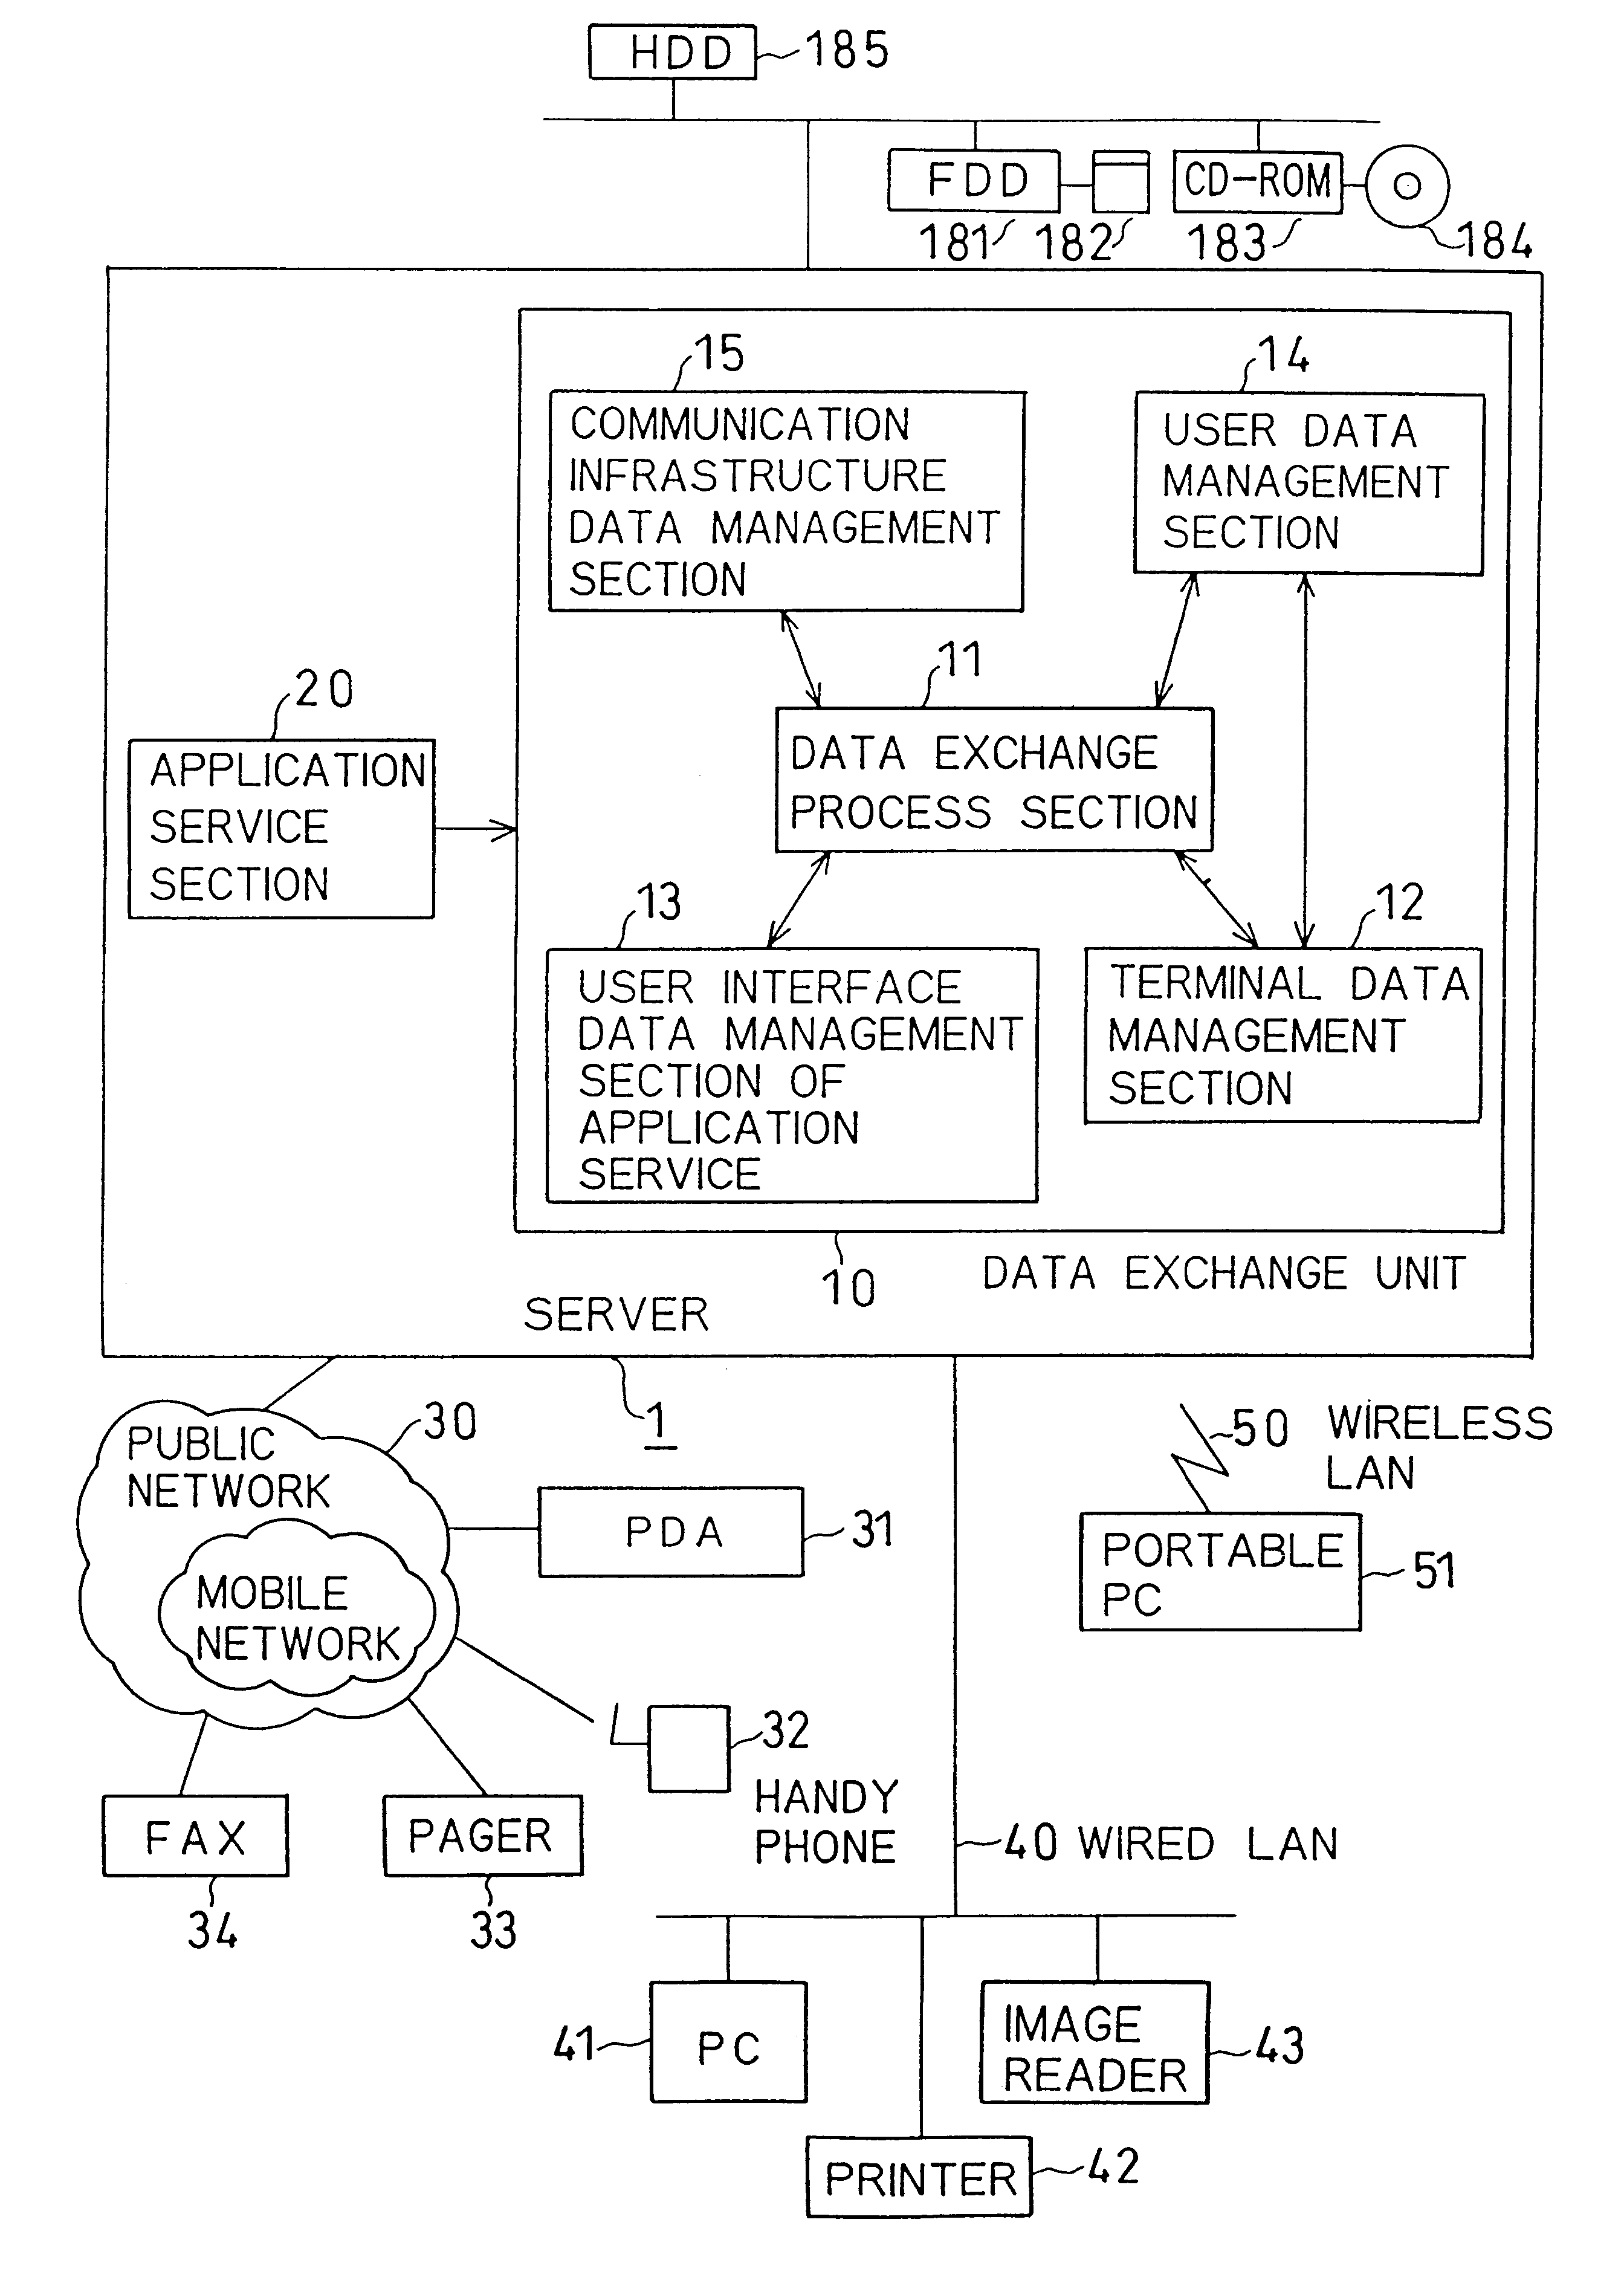 Distributed network computing system for data exchange/conversion between terminals